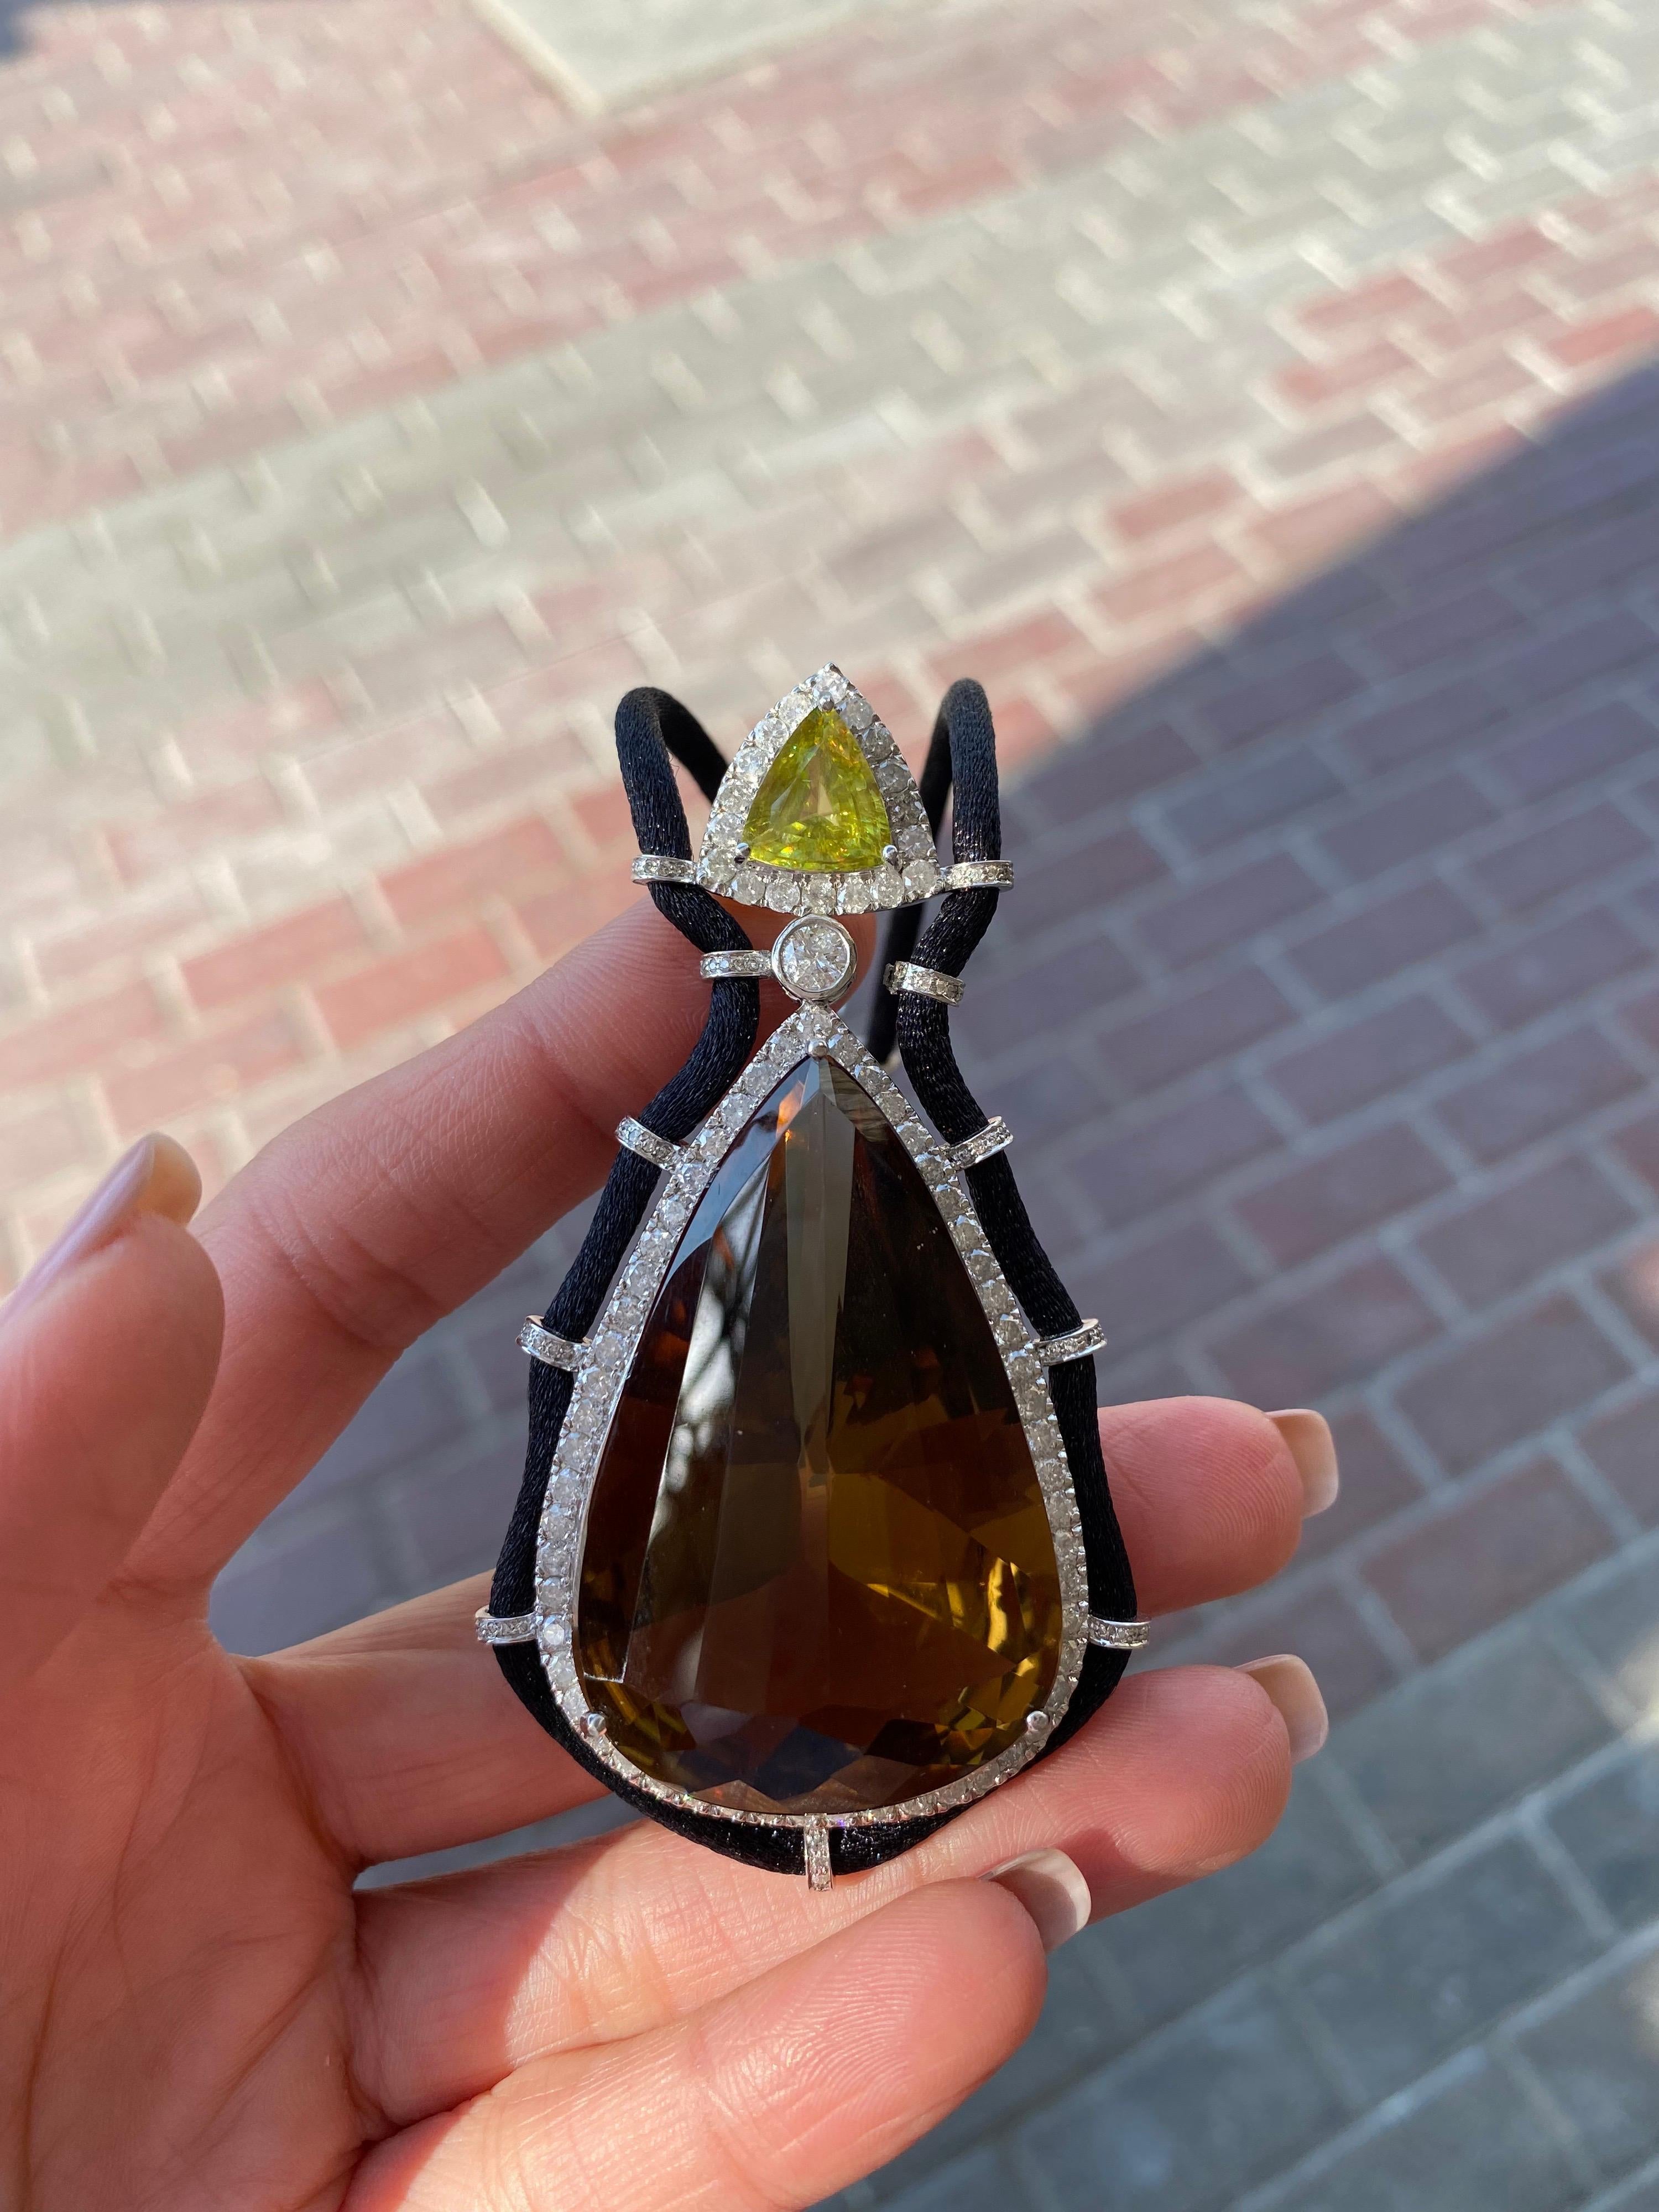 An art-deco necklace, with a 105.61 carat pear shaped Smoky Quartz, 3.08 carat Peridot and Diamonds. The smoky quartz and peridot has no inclusions at all, absolutely transparent with a great cut and luster., and the stones are set in Gold-plated